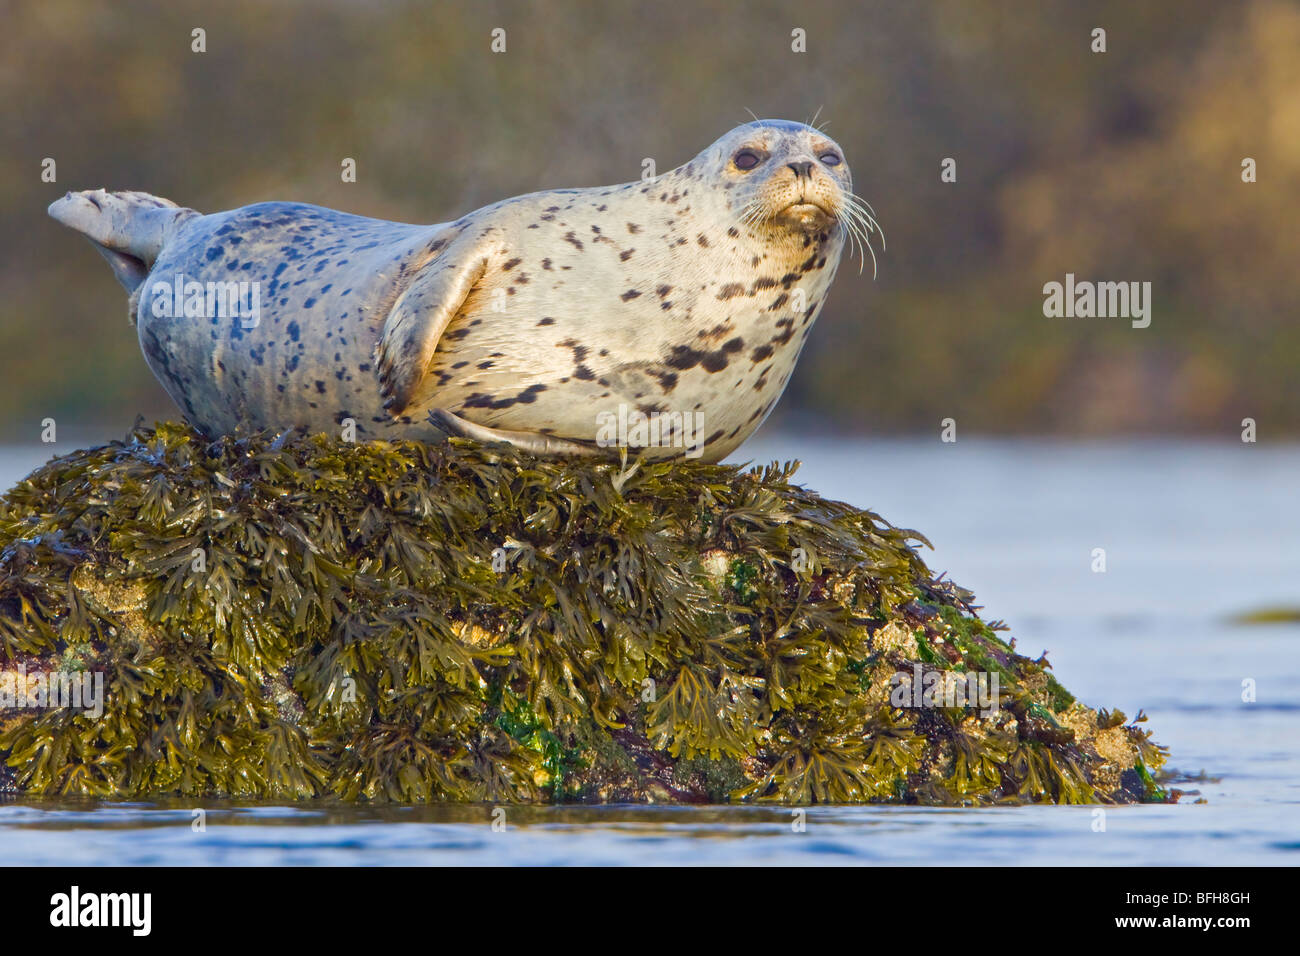 Harbour seal perched on a rock in Victoria, BC, Canada. Stock Photo